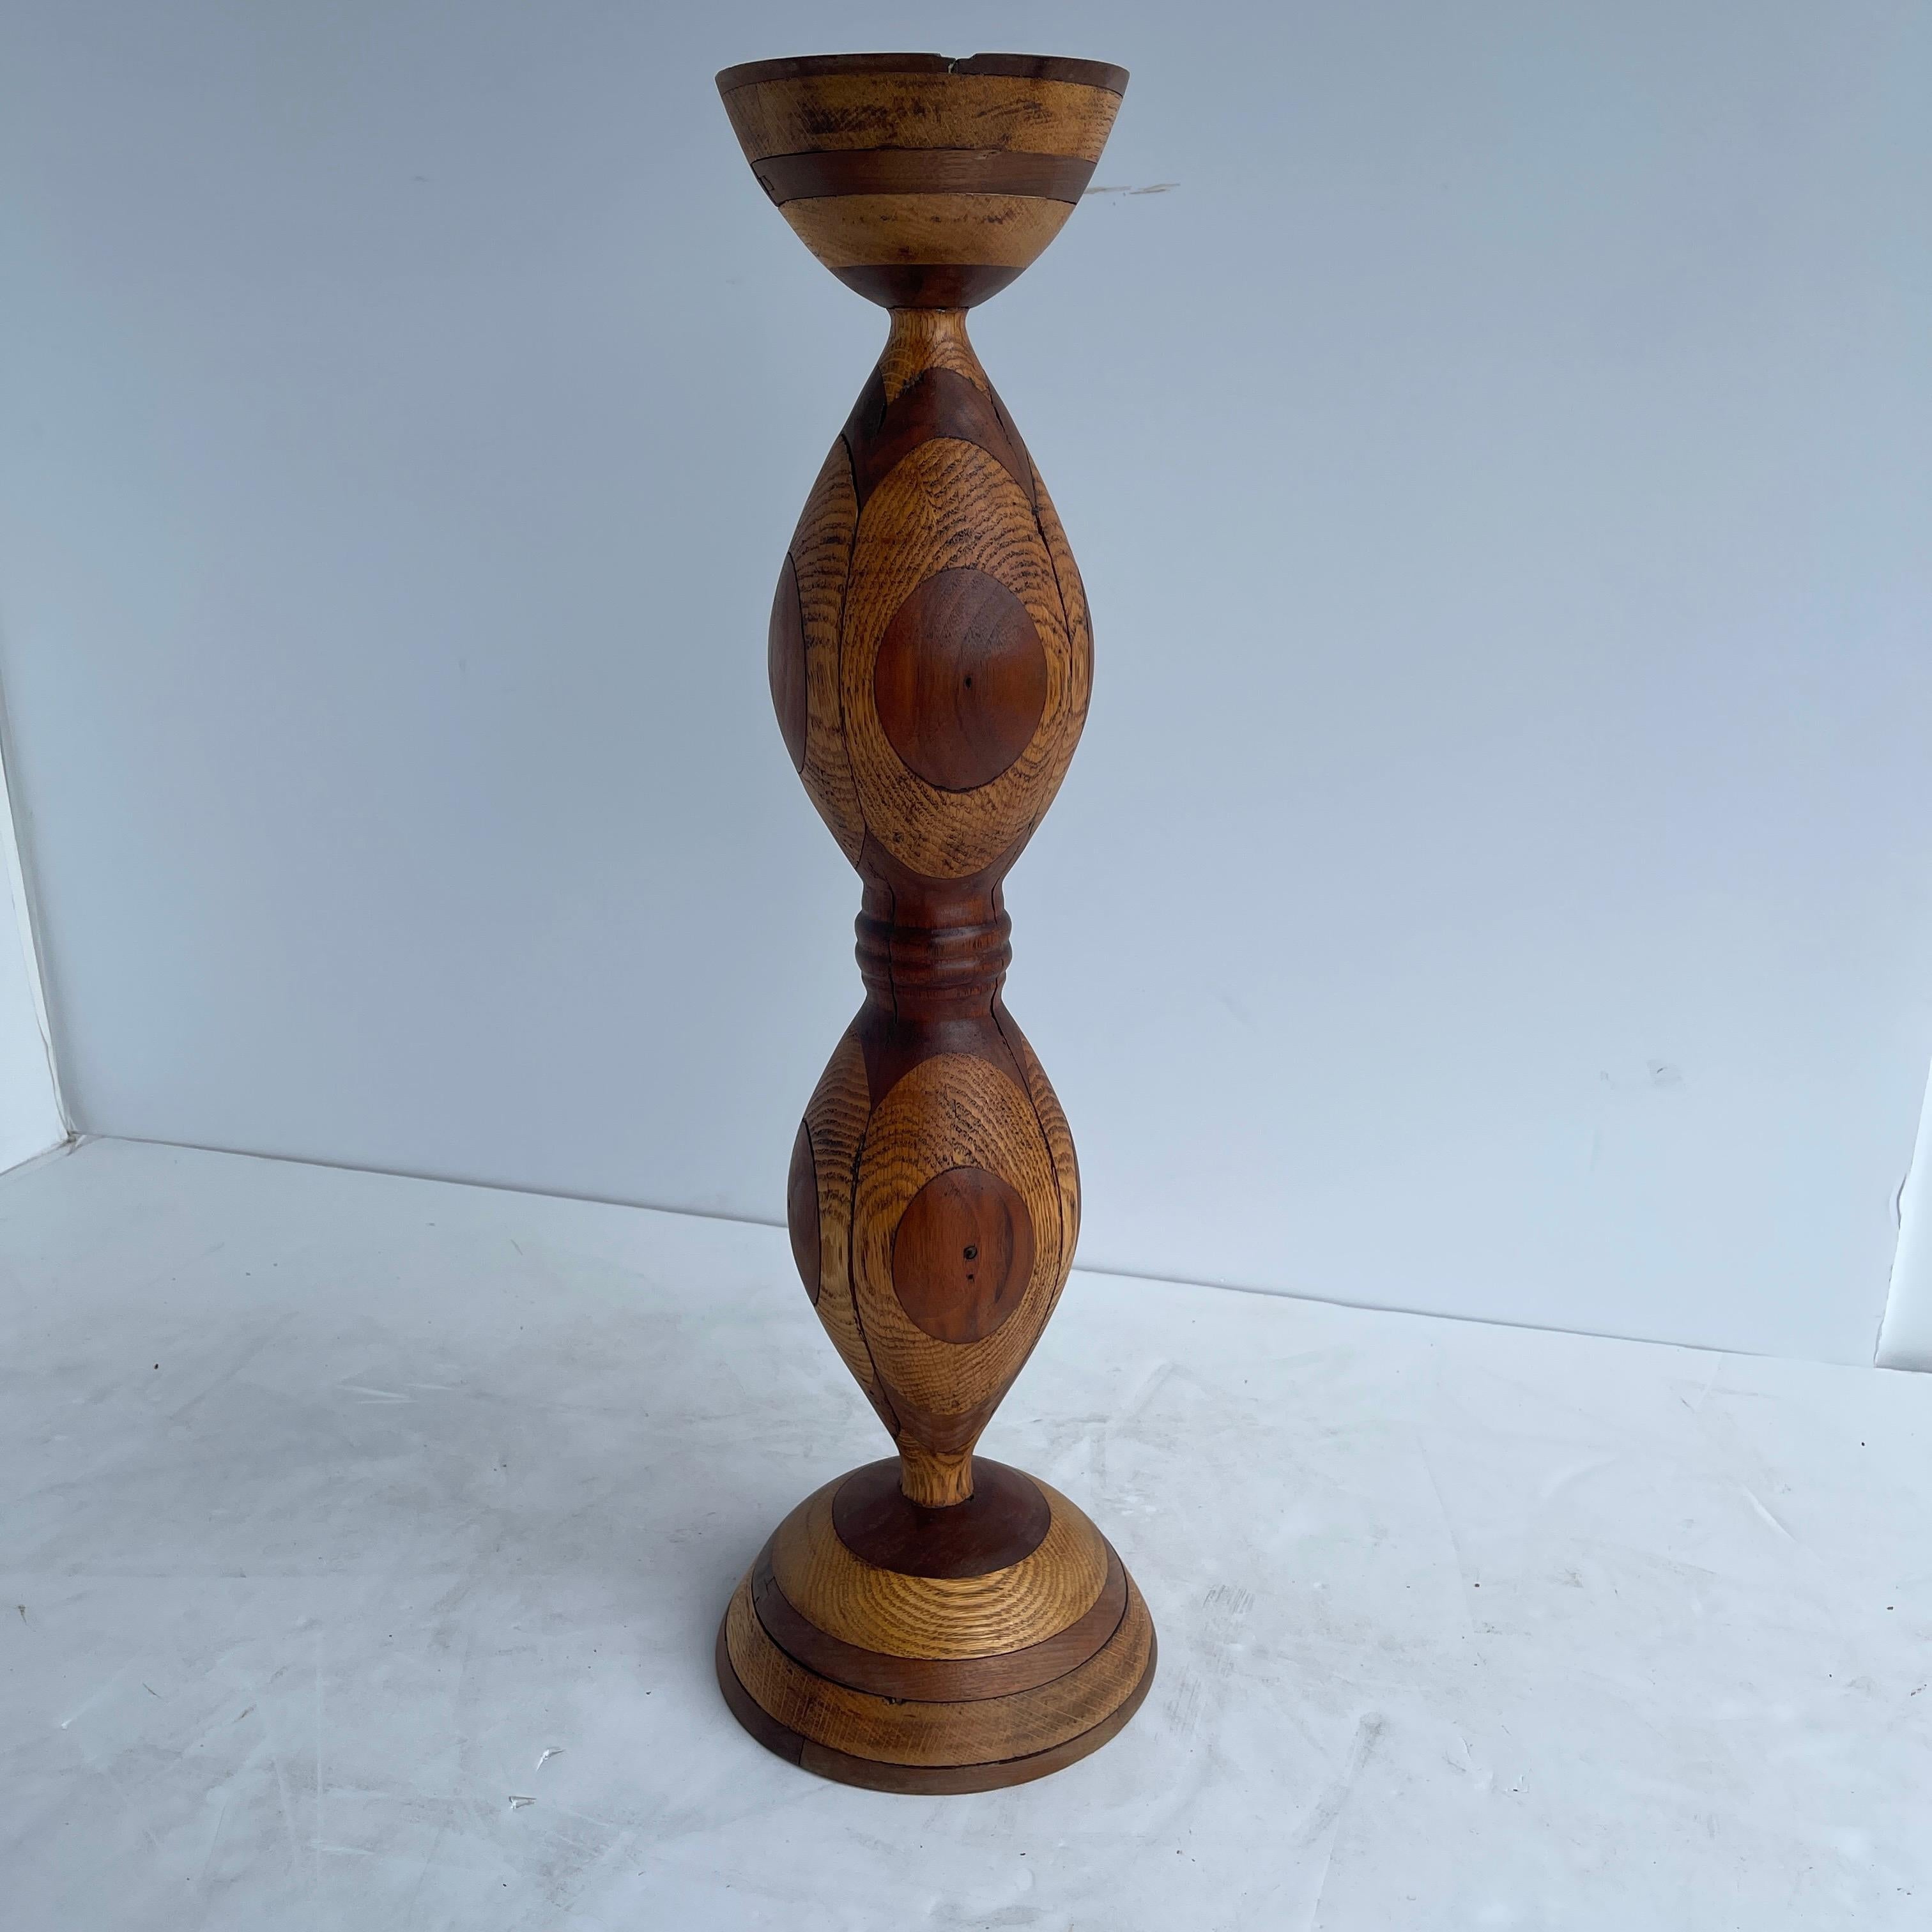 Probably French handcrafted multiple wooden ashtray stand. Tall and sturdy this floor stand ashtray has beautiful wood inlay. Could also be used as a candleholder.